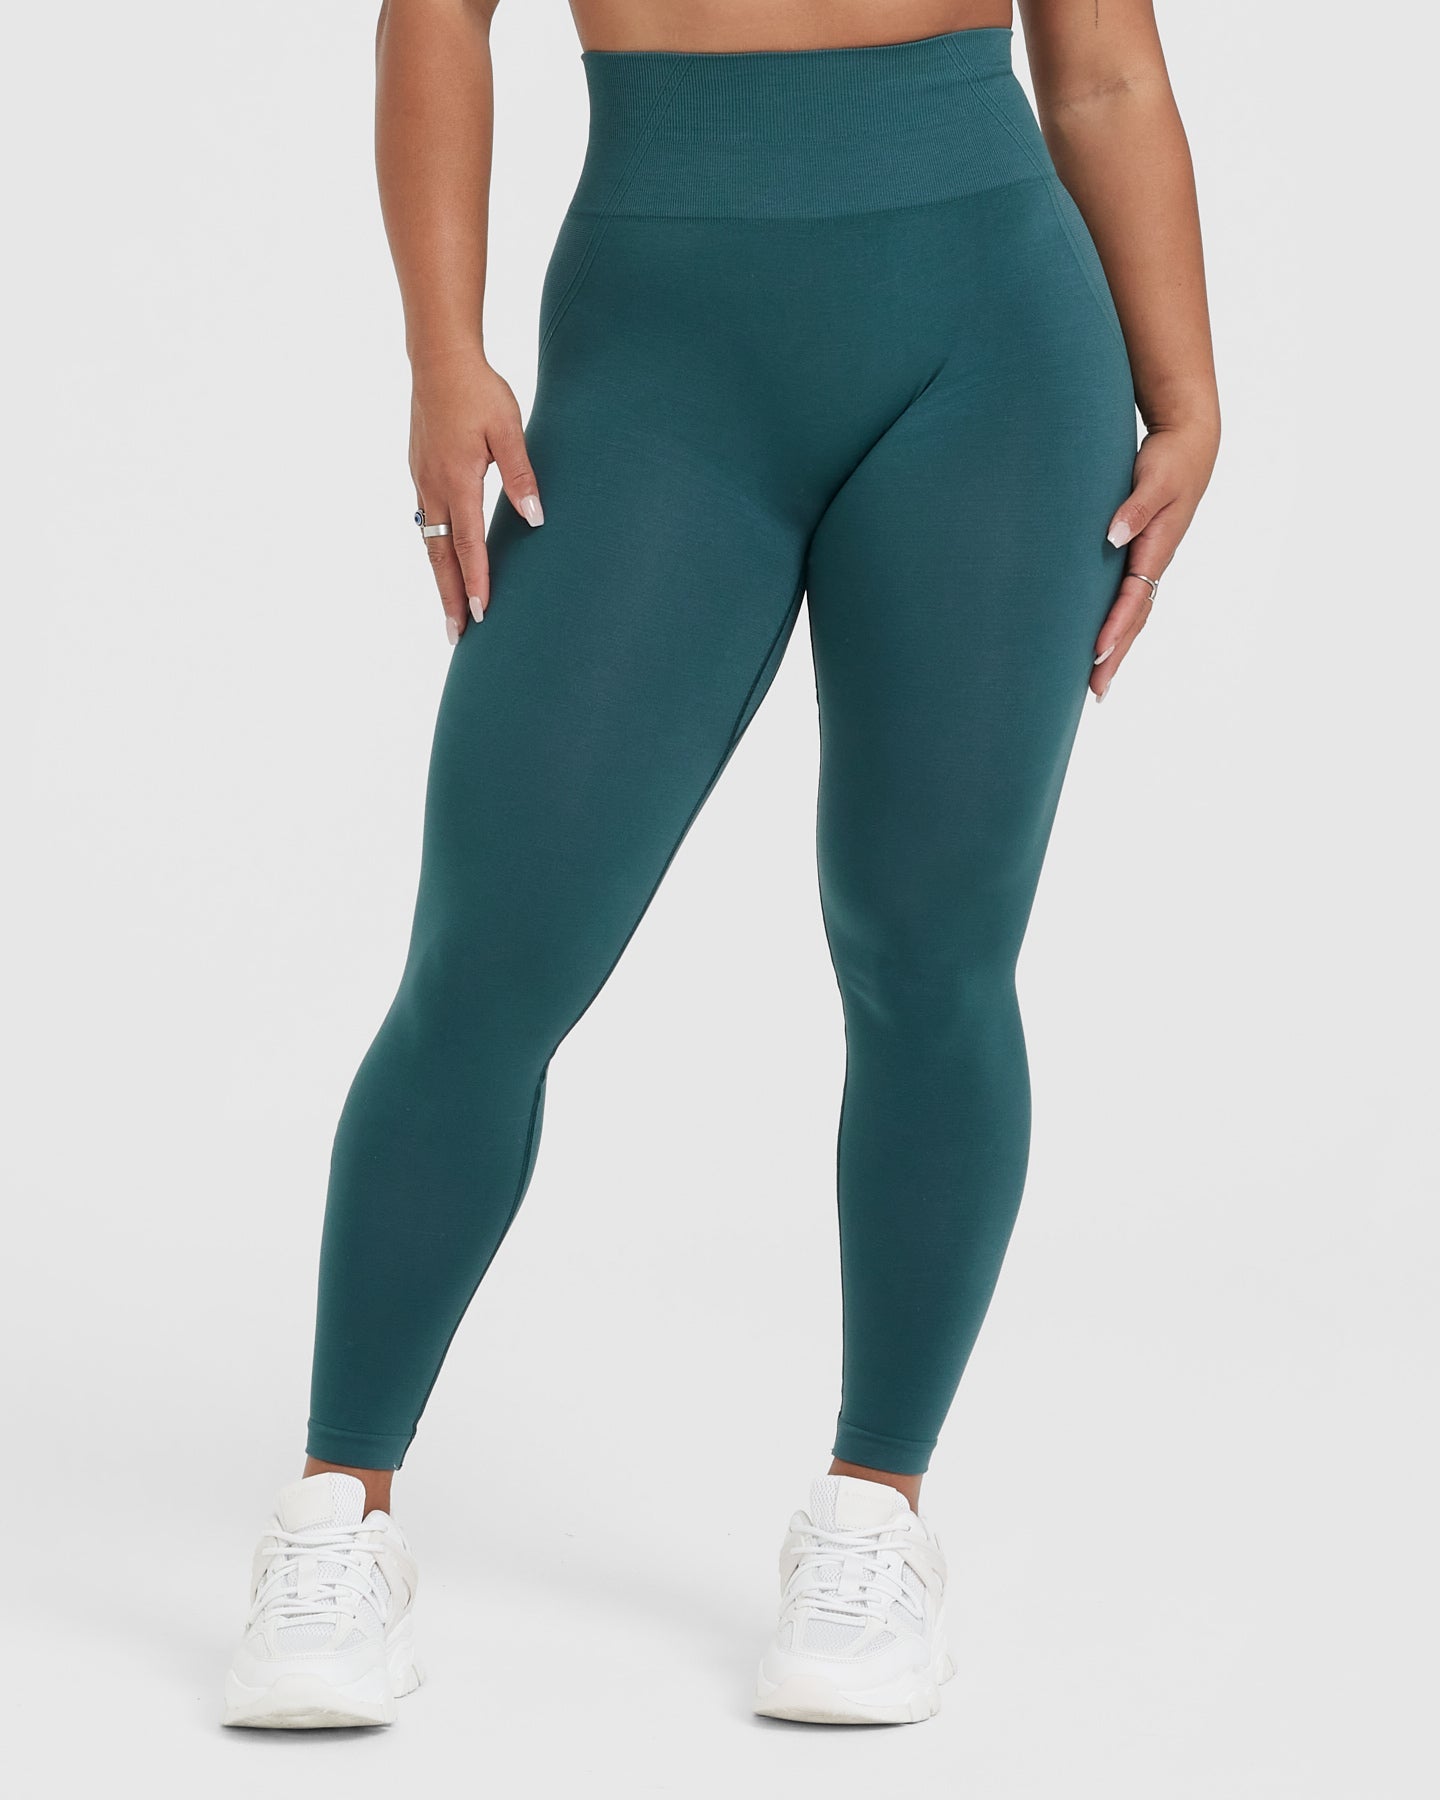 high Teal Reflective Piping High Waist Gym Legging, PrettyLittleThing